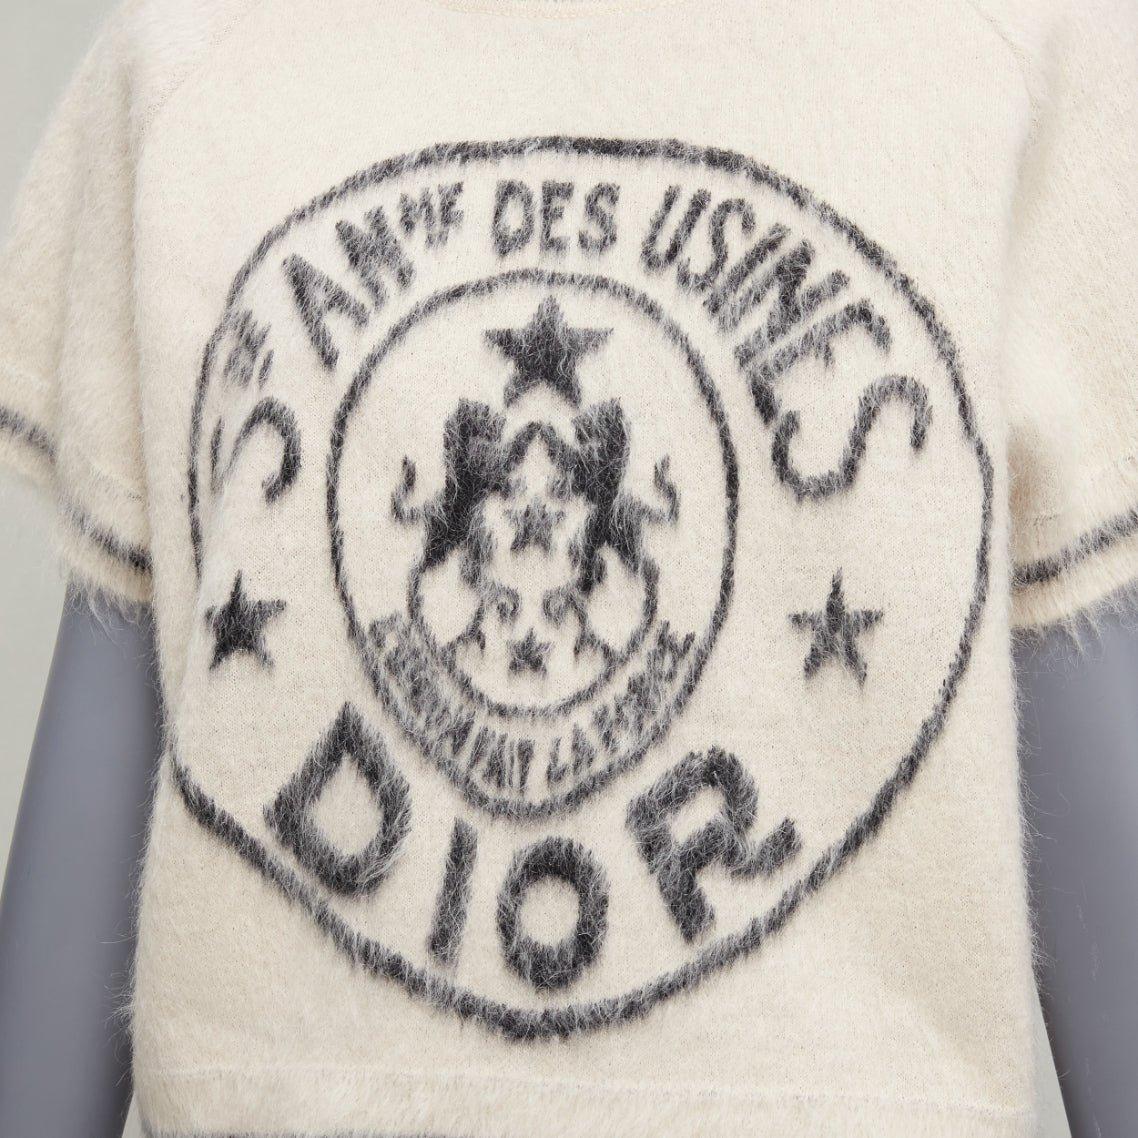 CHRISTIAN DIOR 2022 Runway L'union fait la Force mohair stamp sweater FR34 XS
Reference: AAWC/A00658
Brand: Dior
Designer: Maria Grazia Chiuri
Collection: FW 2022 L'Union Fait la Force - Runway
Material: Mohair, Boucle Wool, Blend
Color: Cream,